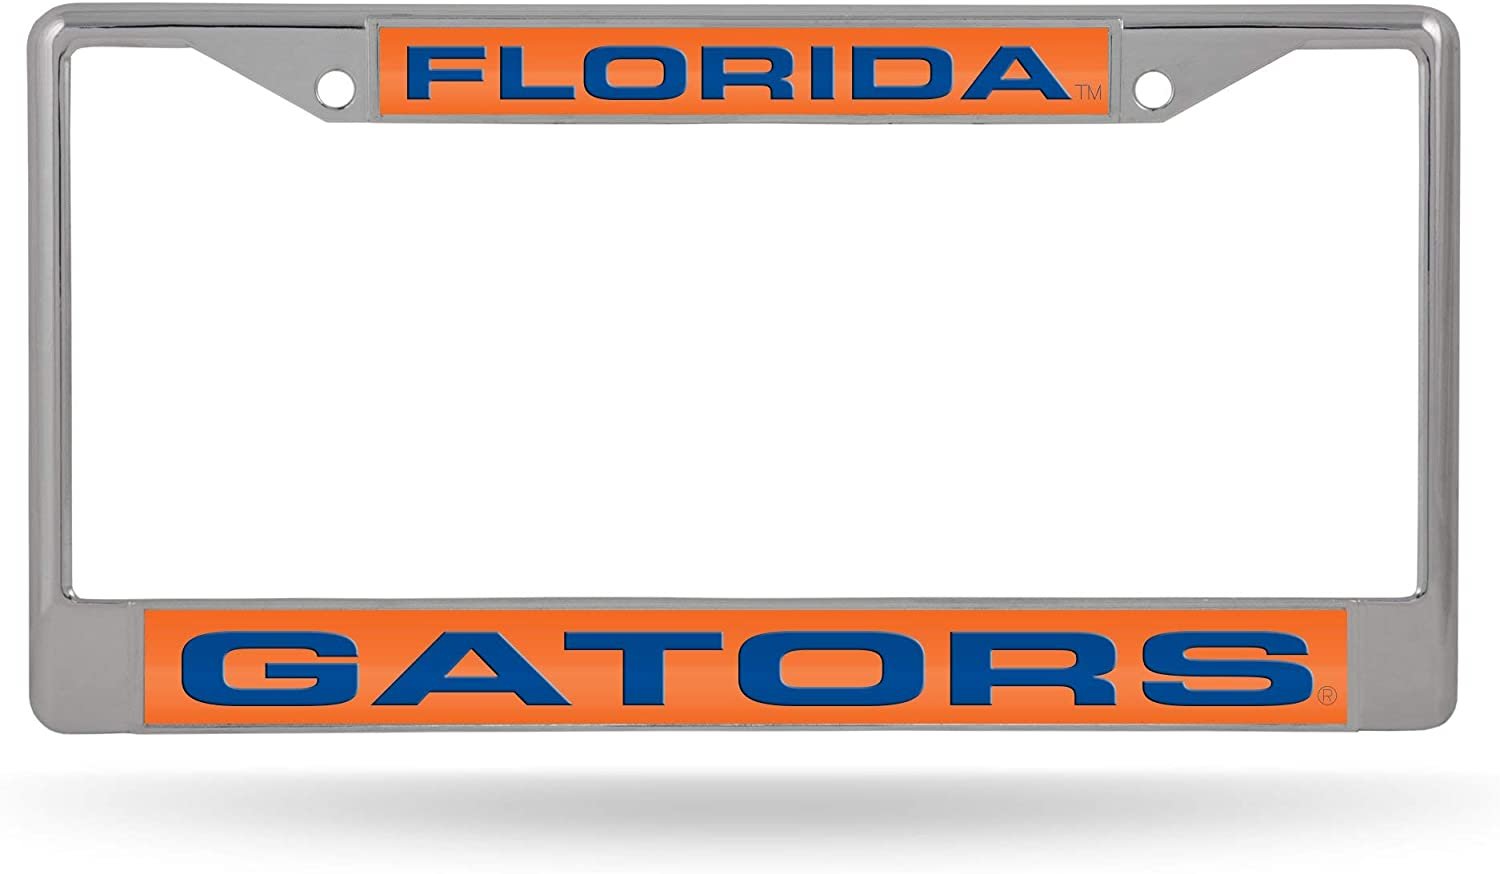 University of Florida Gators Chrome Metal License Plate Frame Tag Cover, Laser Acrylic Mirrored Inserts, 12x6 Inch